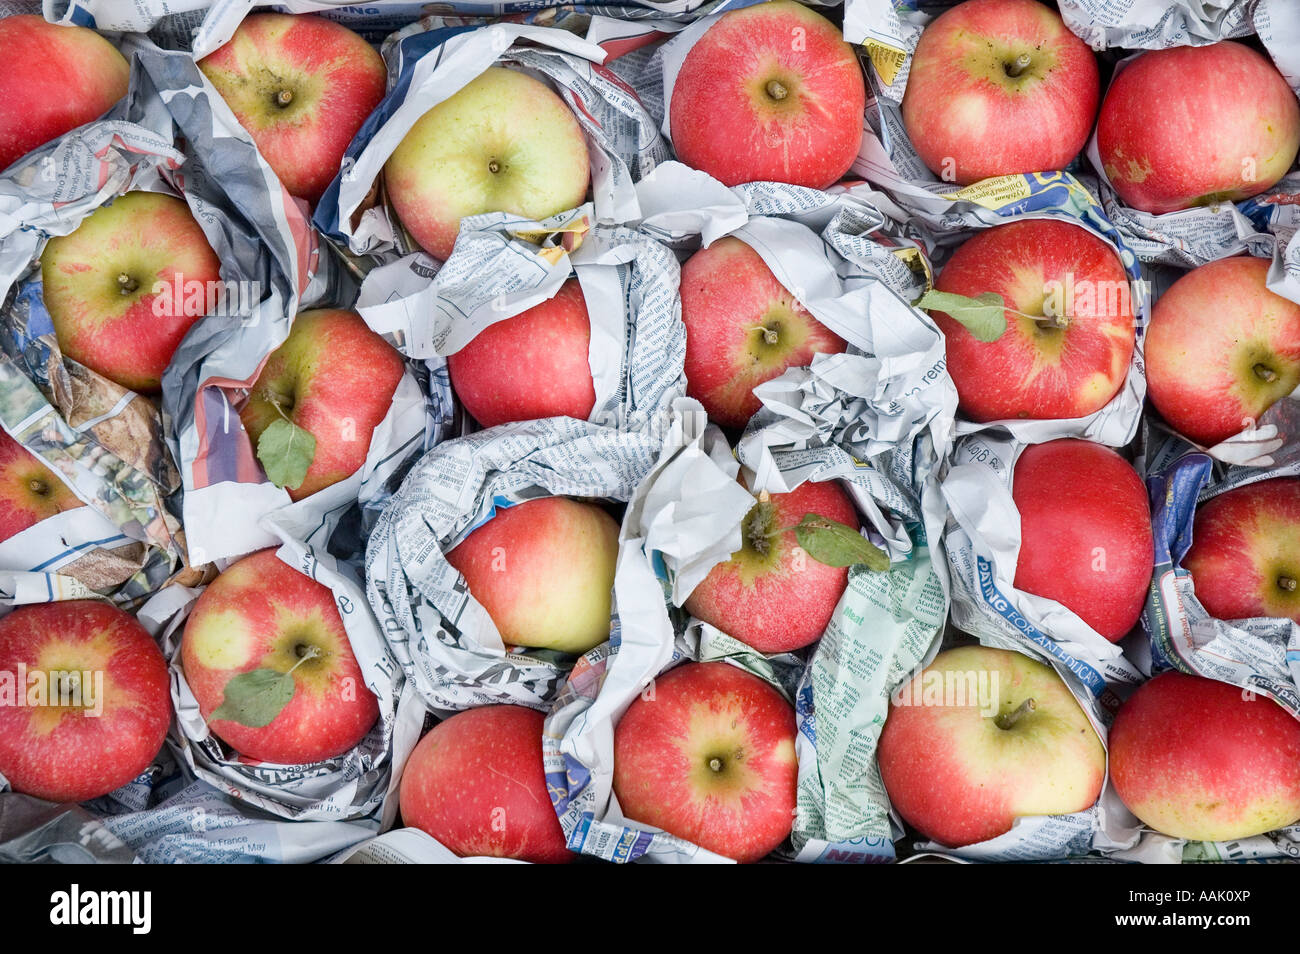 English apples wrapped in newspaper within a box Stock Photo